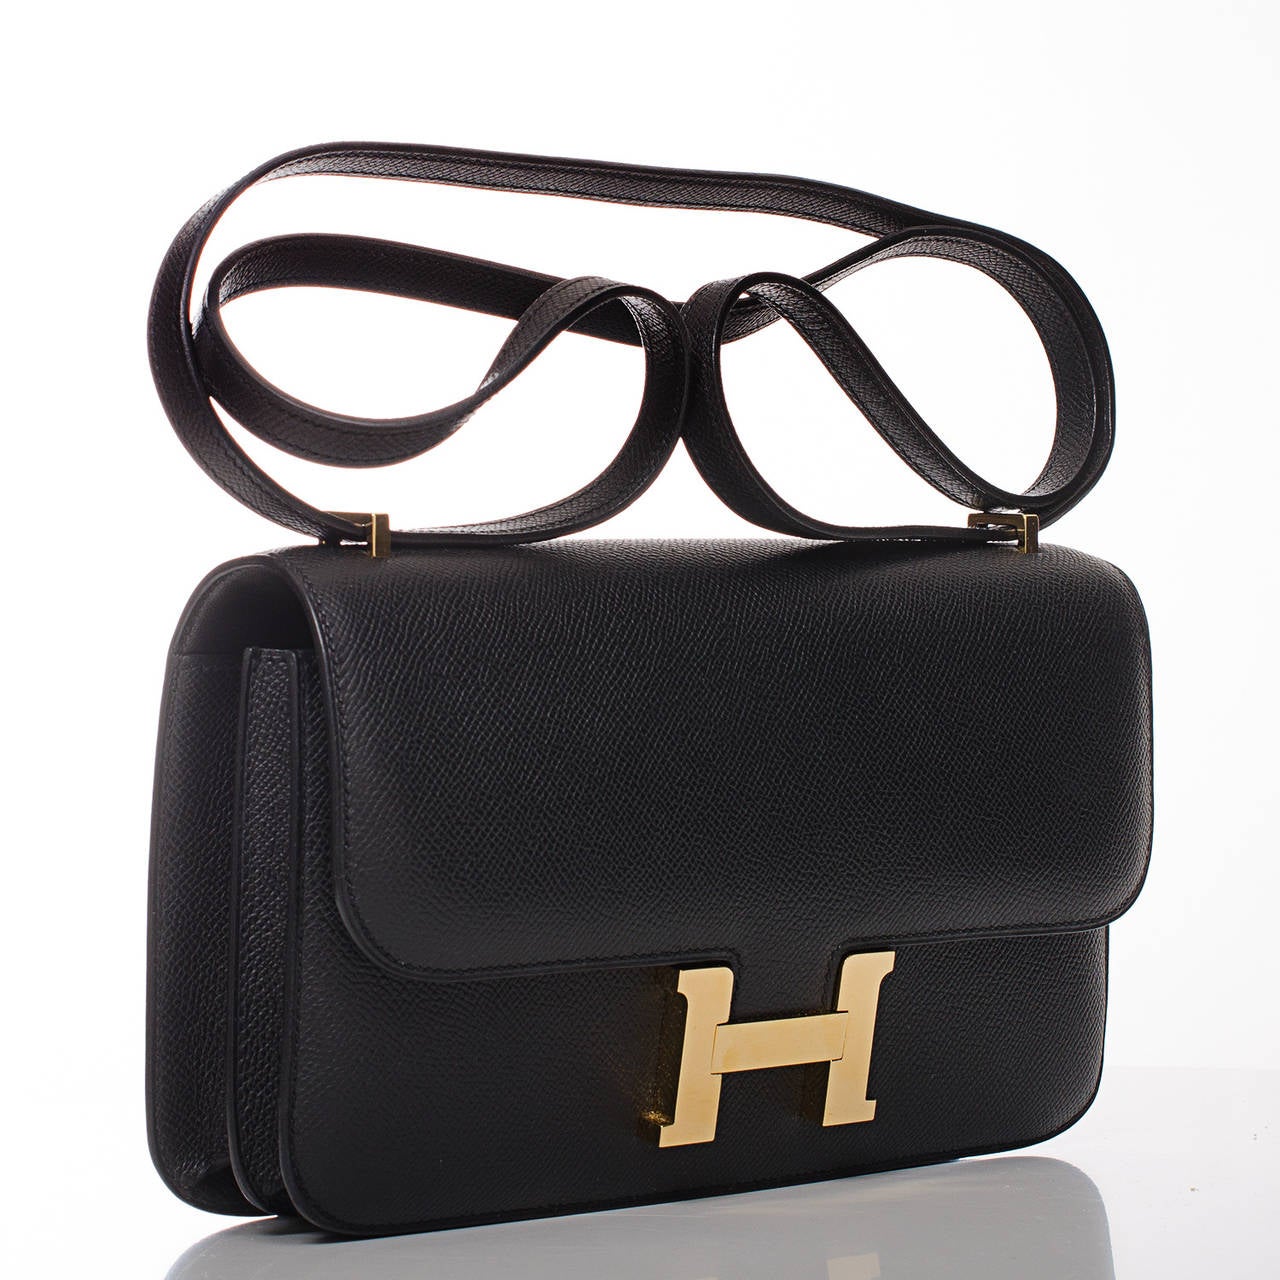 Hermes Black epsom leather Constance Elan 25cm with gold hardware.

This classic Hermes style features tonal stitching, gold hardware, metal 